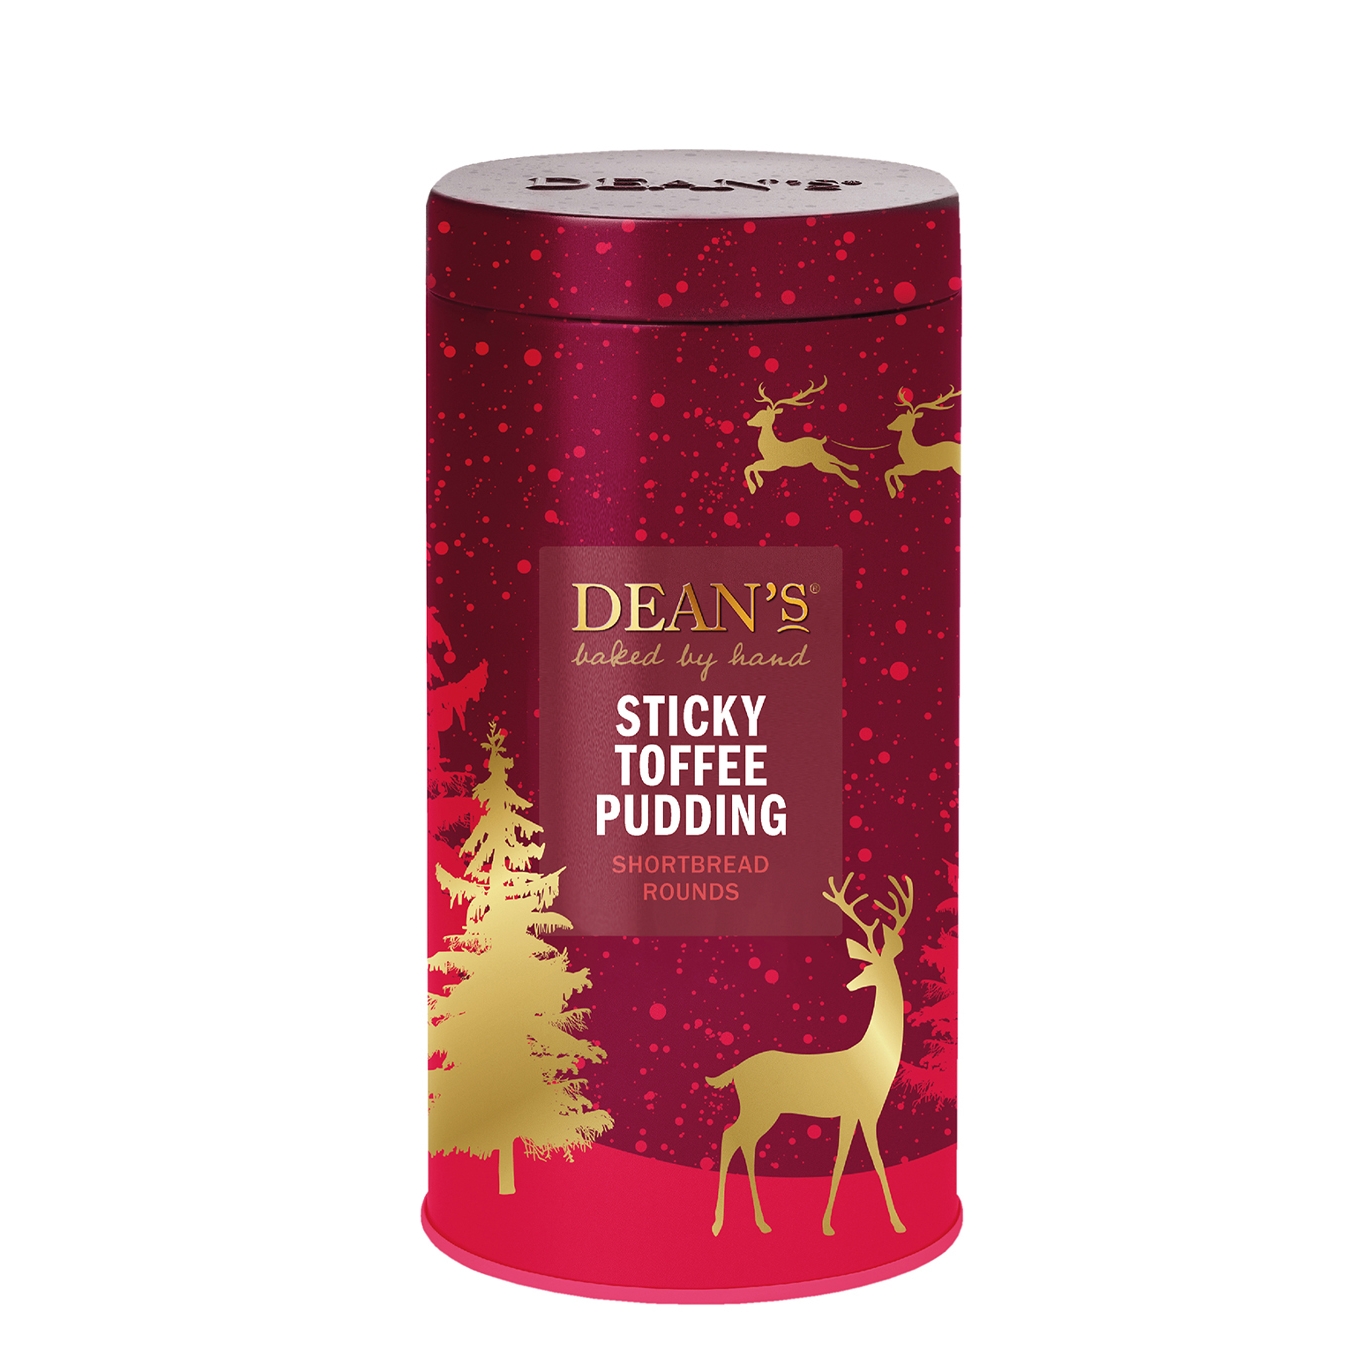 Dean's Sticky Toffee Pudding Shortbread Rounds Tin 150g